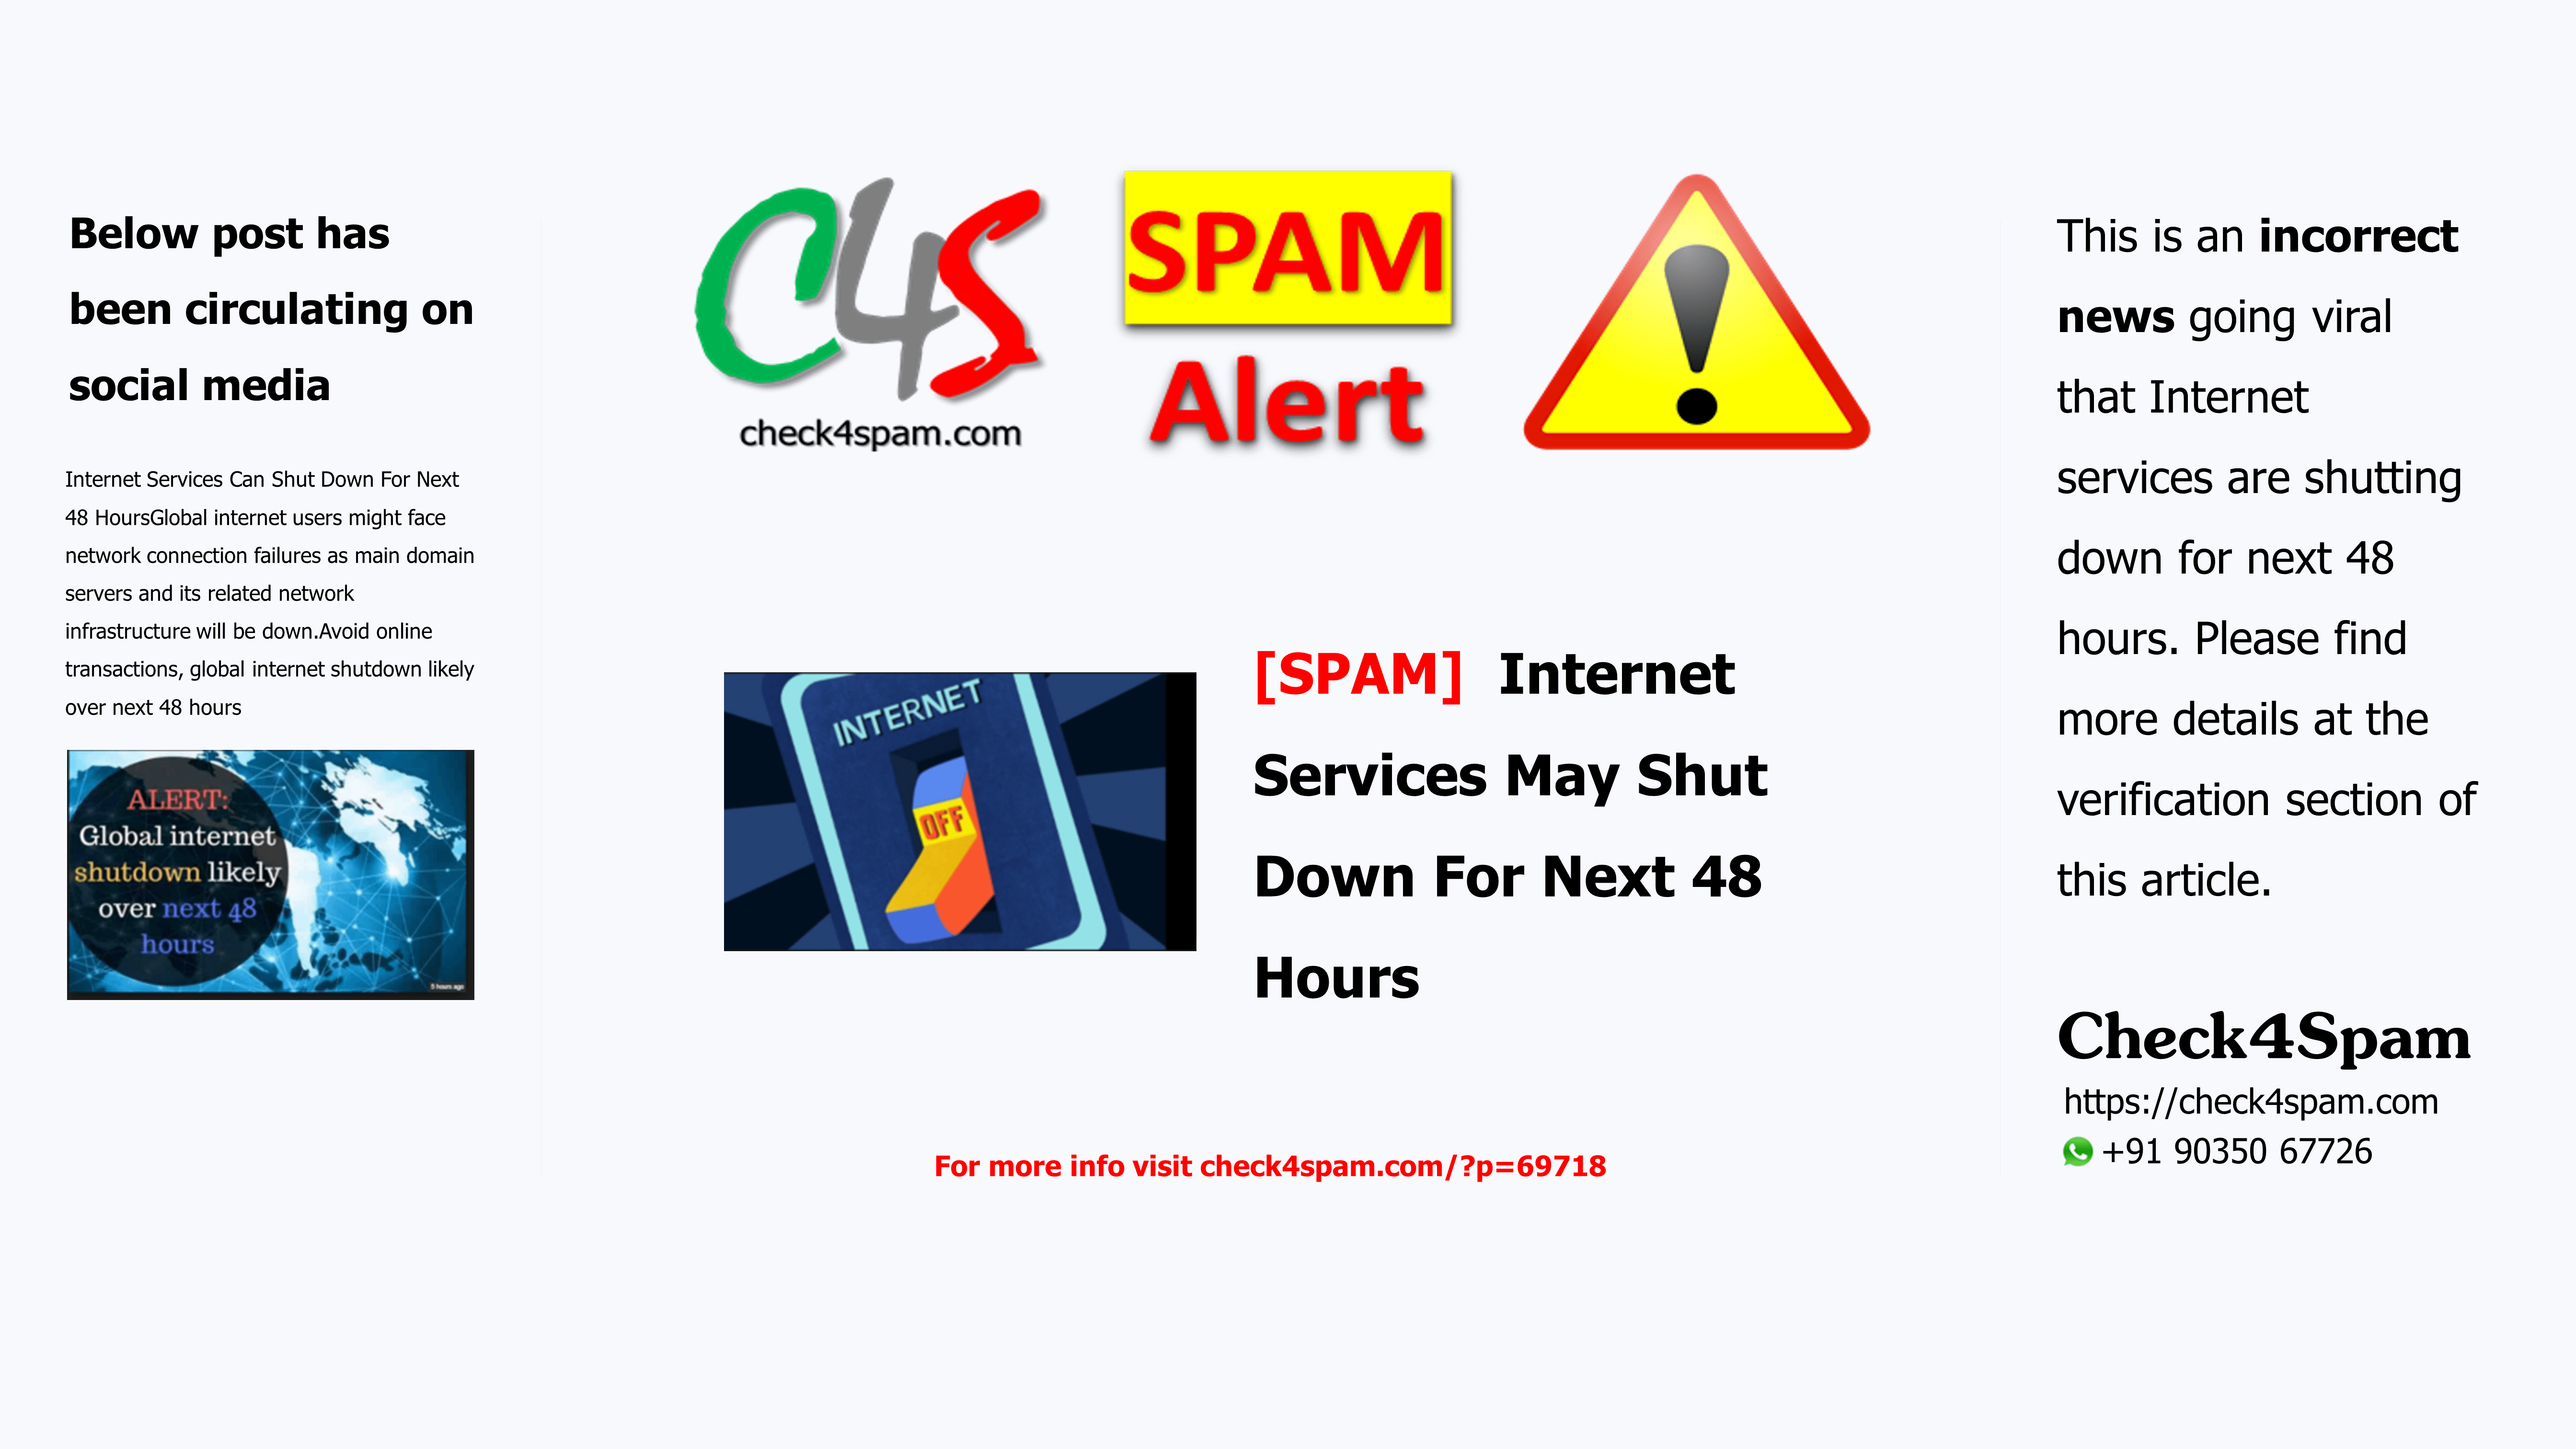 [SPAM] Internet Services May Shut Down For Next 48 Hours